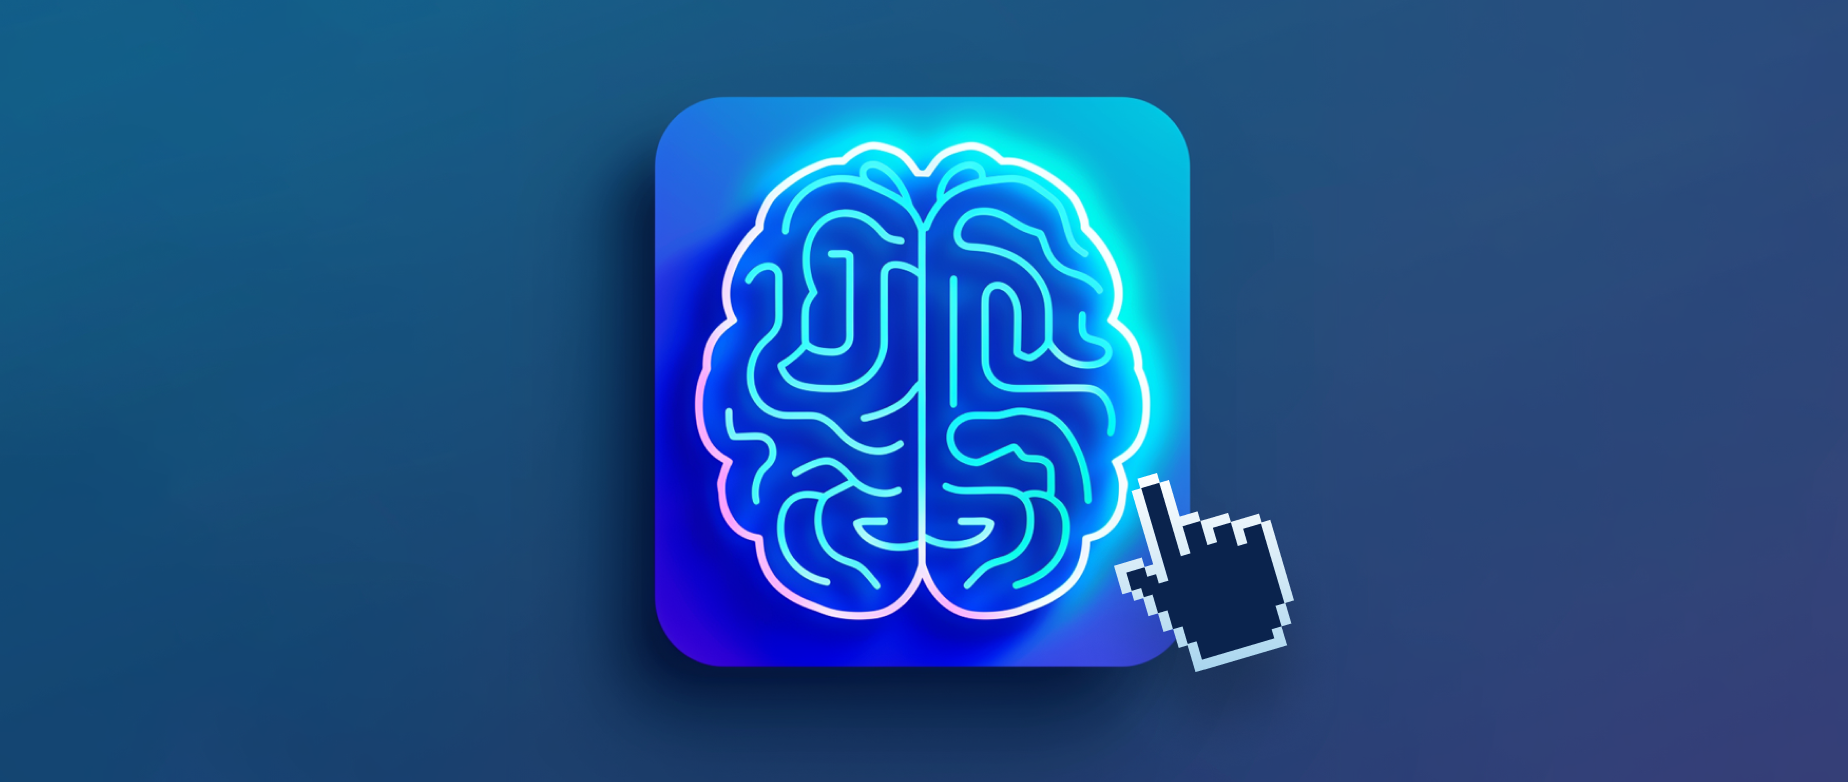 A cursor selecting an app icon with an illuminated brain on a blue background.